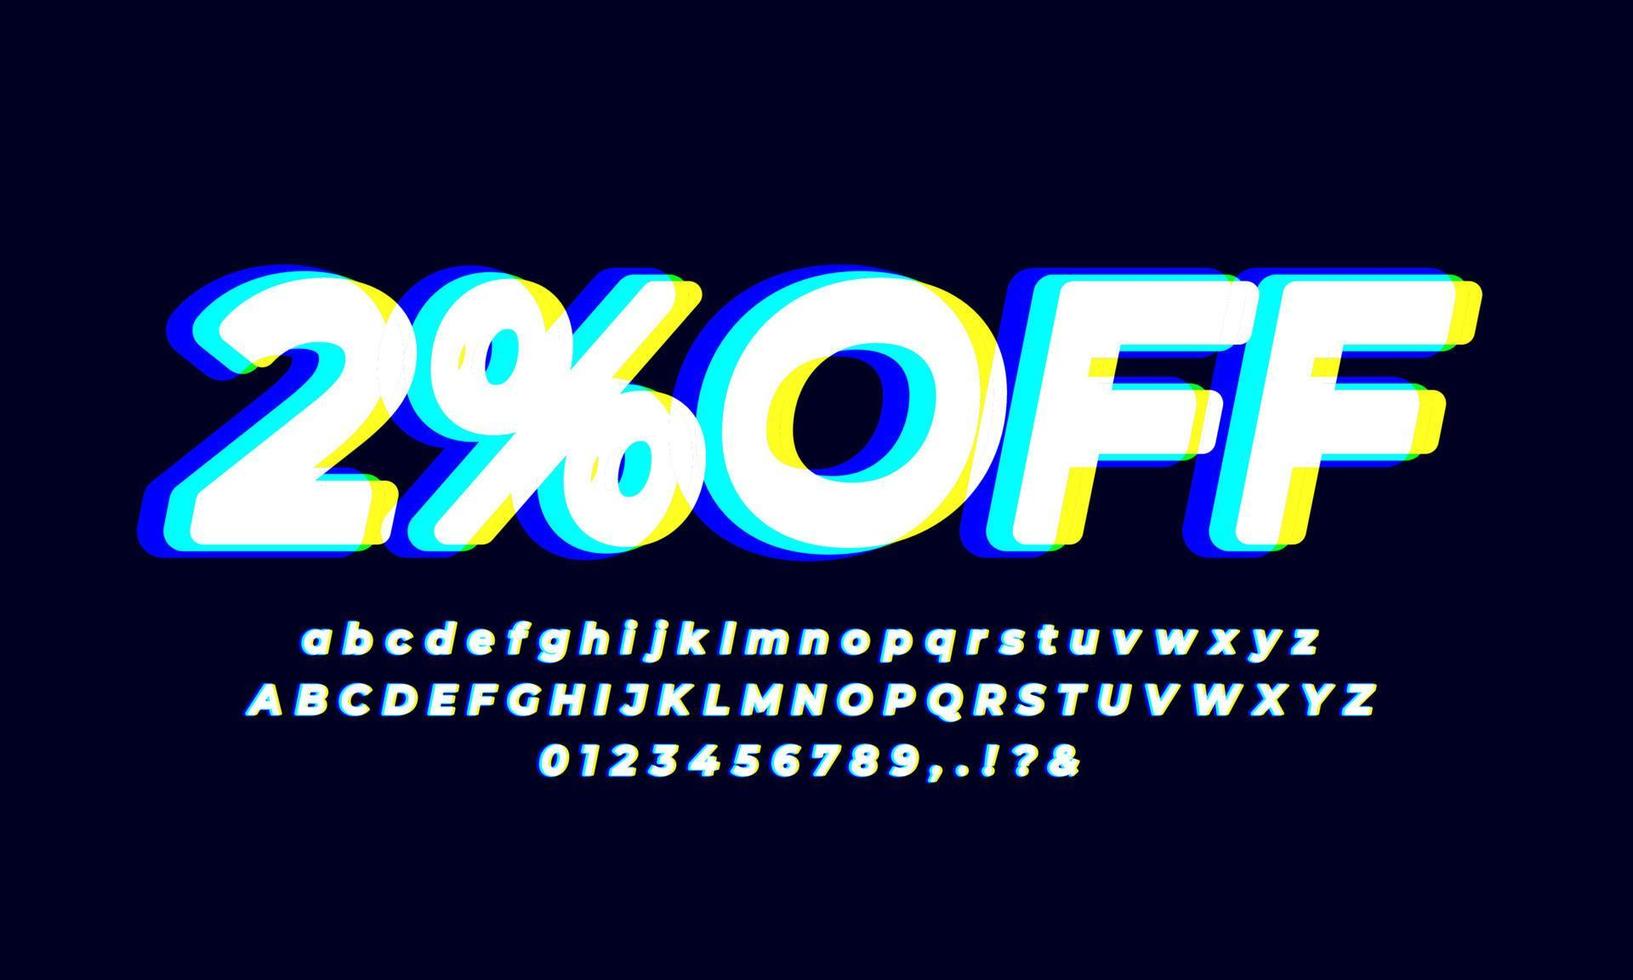 2 percent off two percent sale font  abstract bright vector